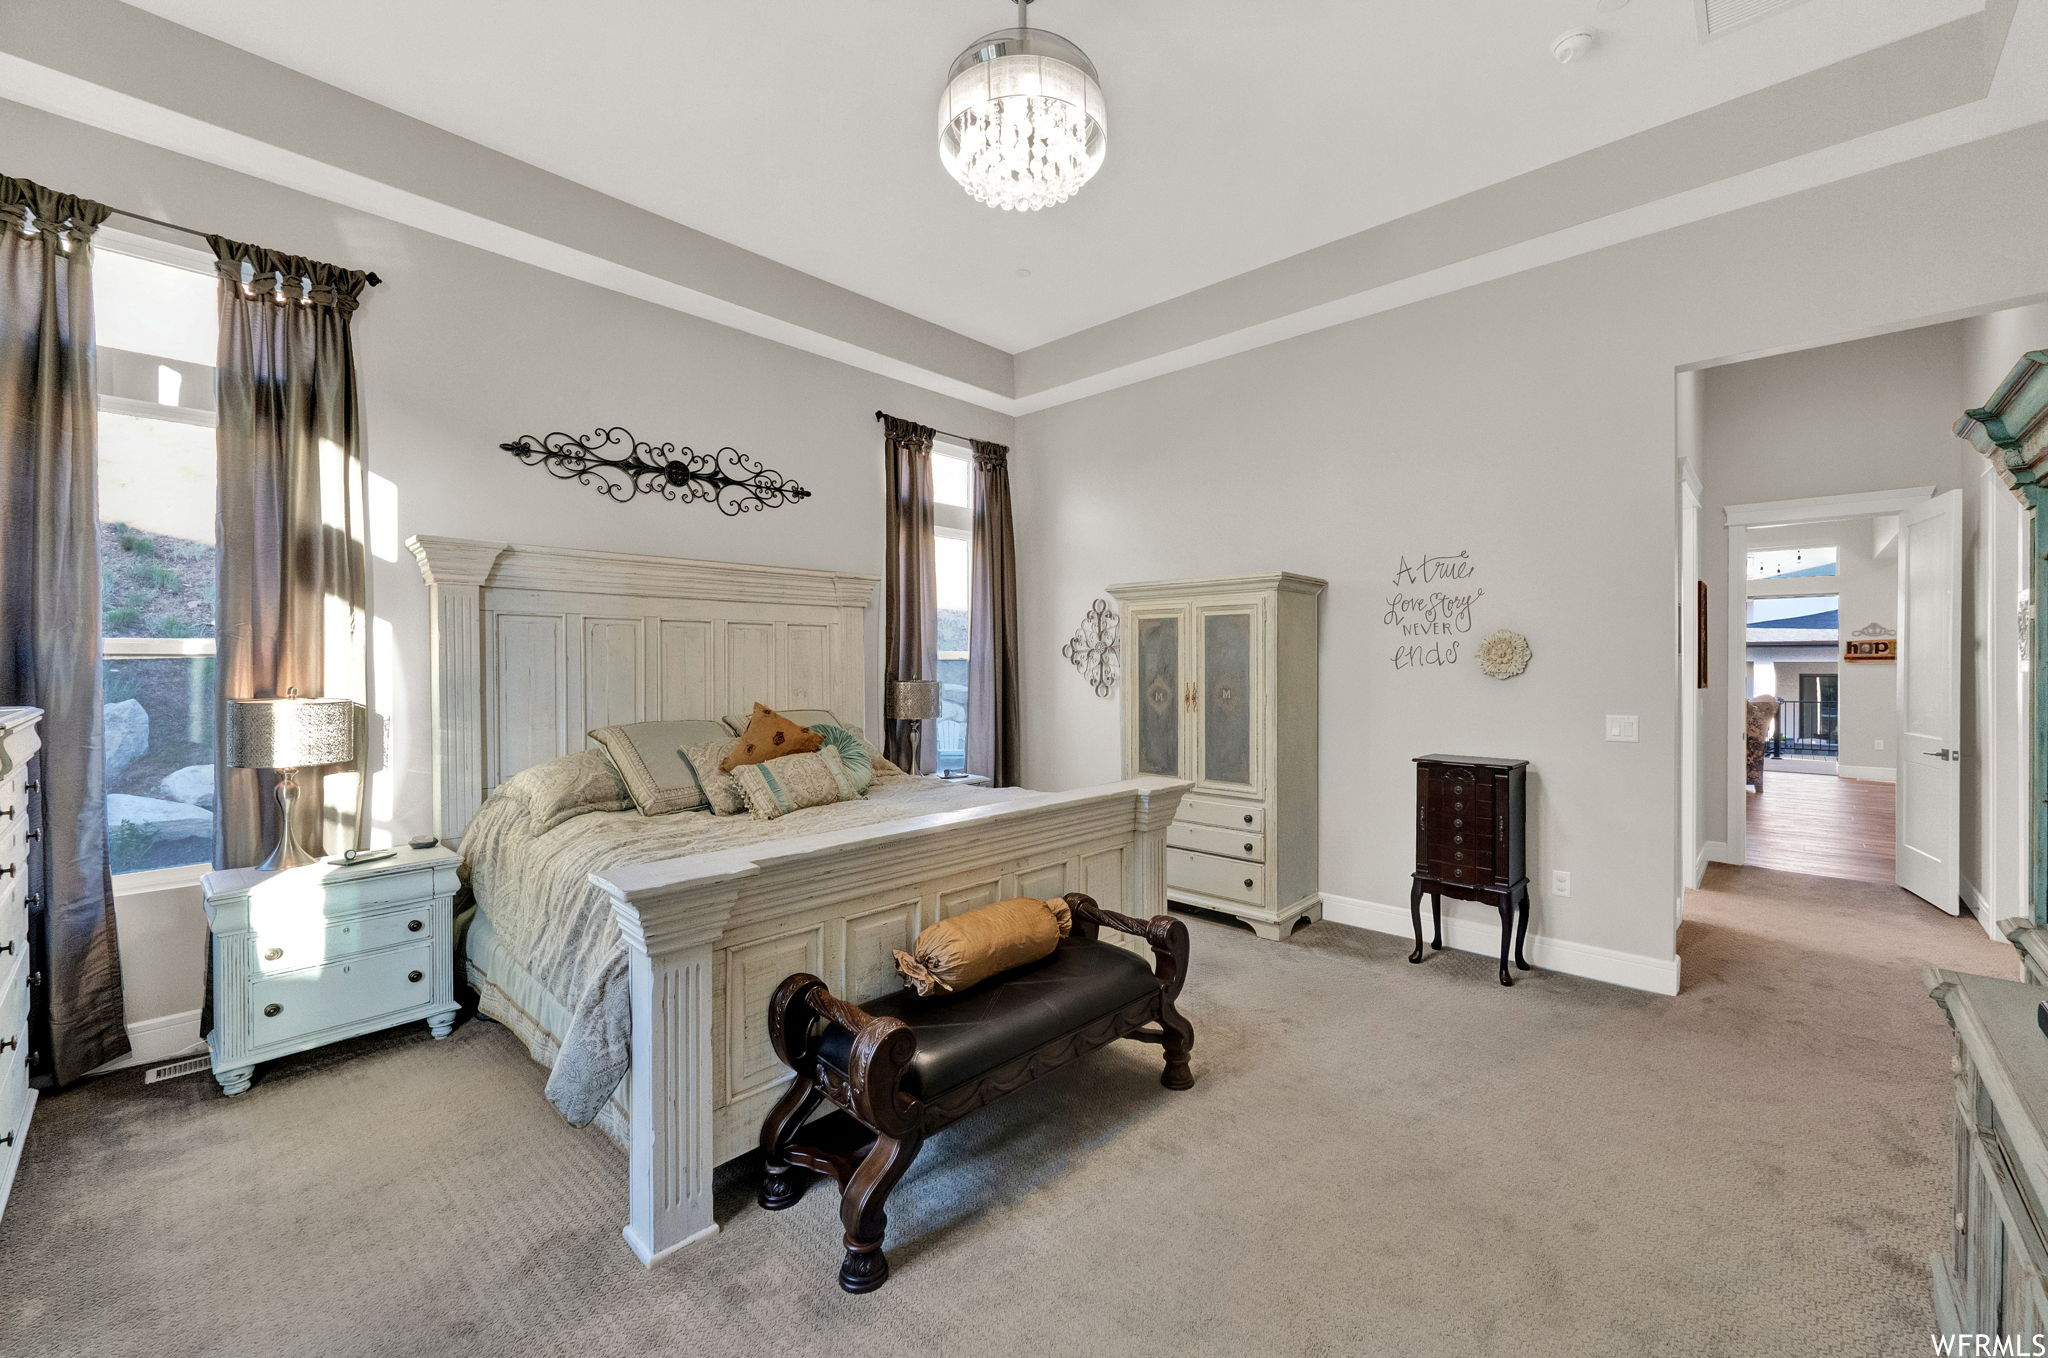 Carpeted bedroom with a tray ceiling and multiple windows